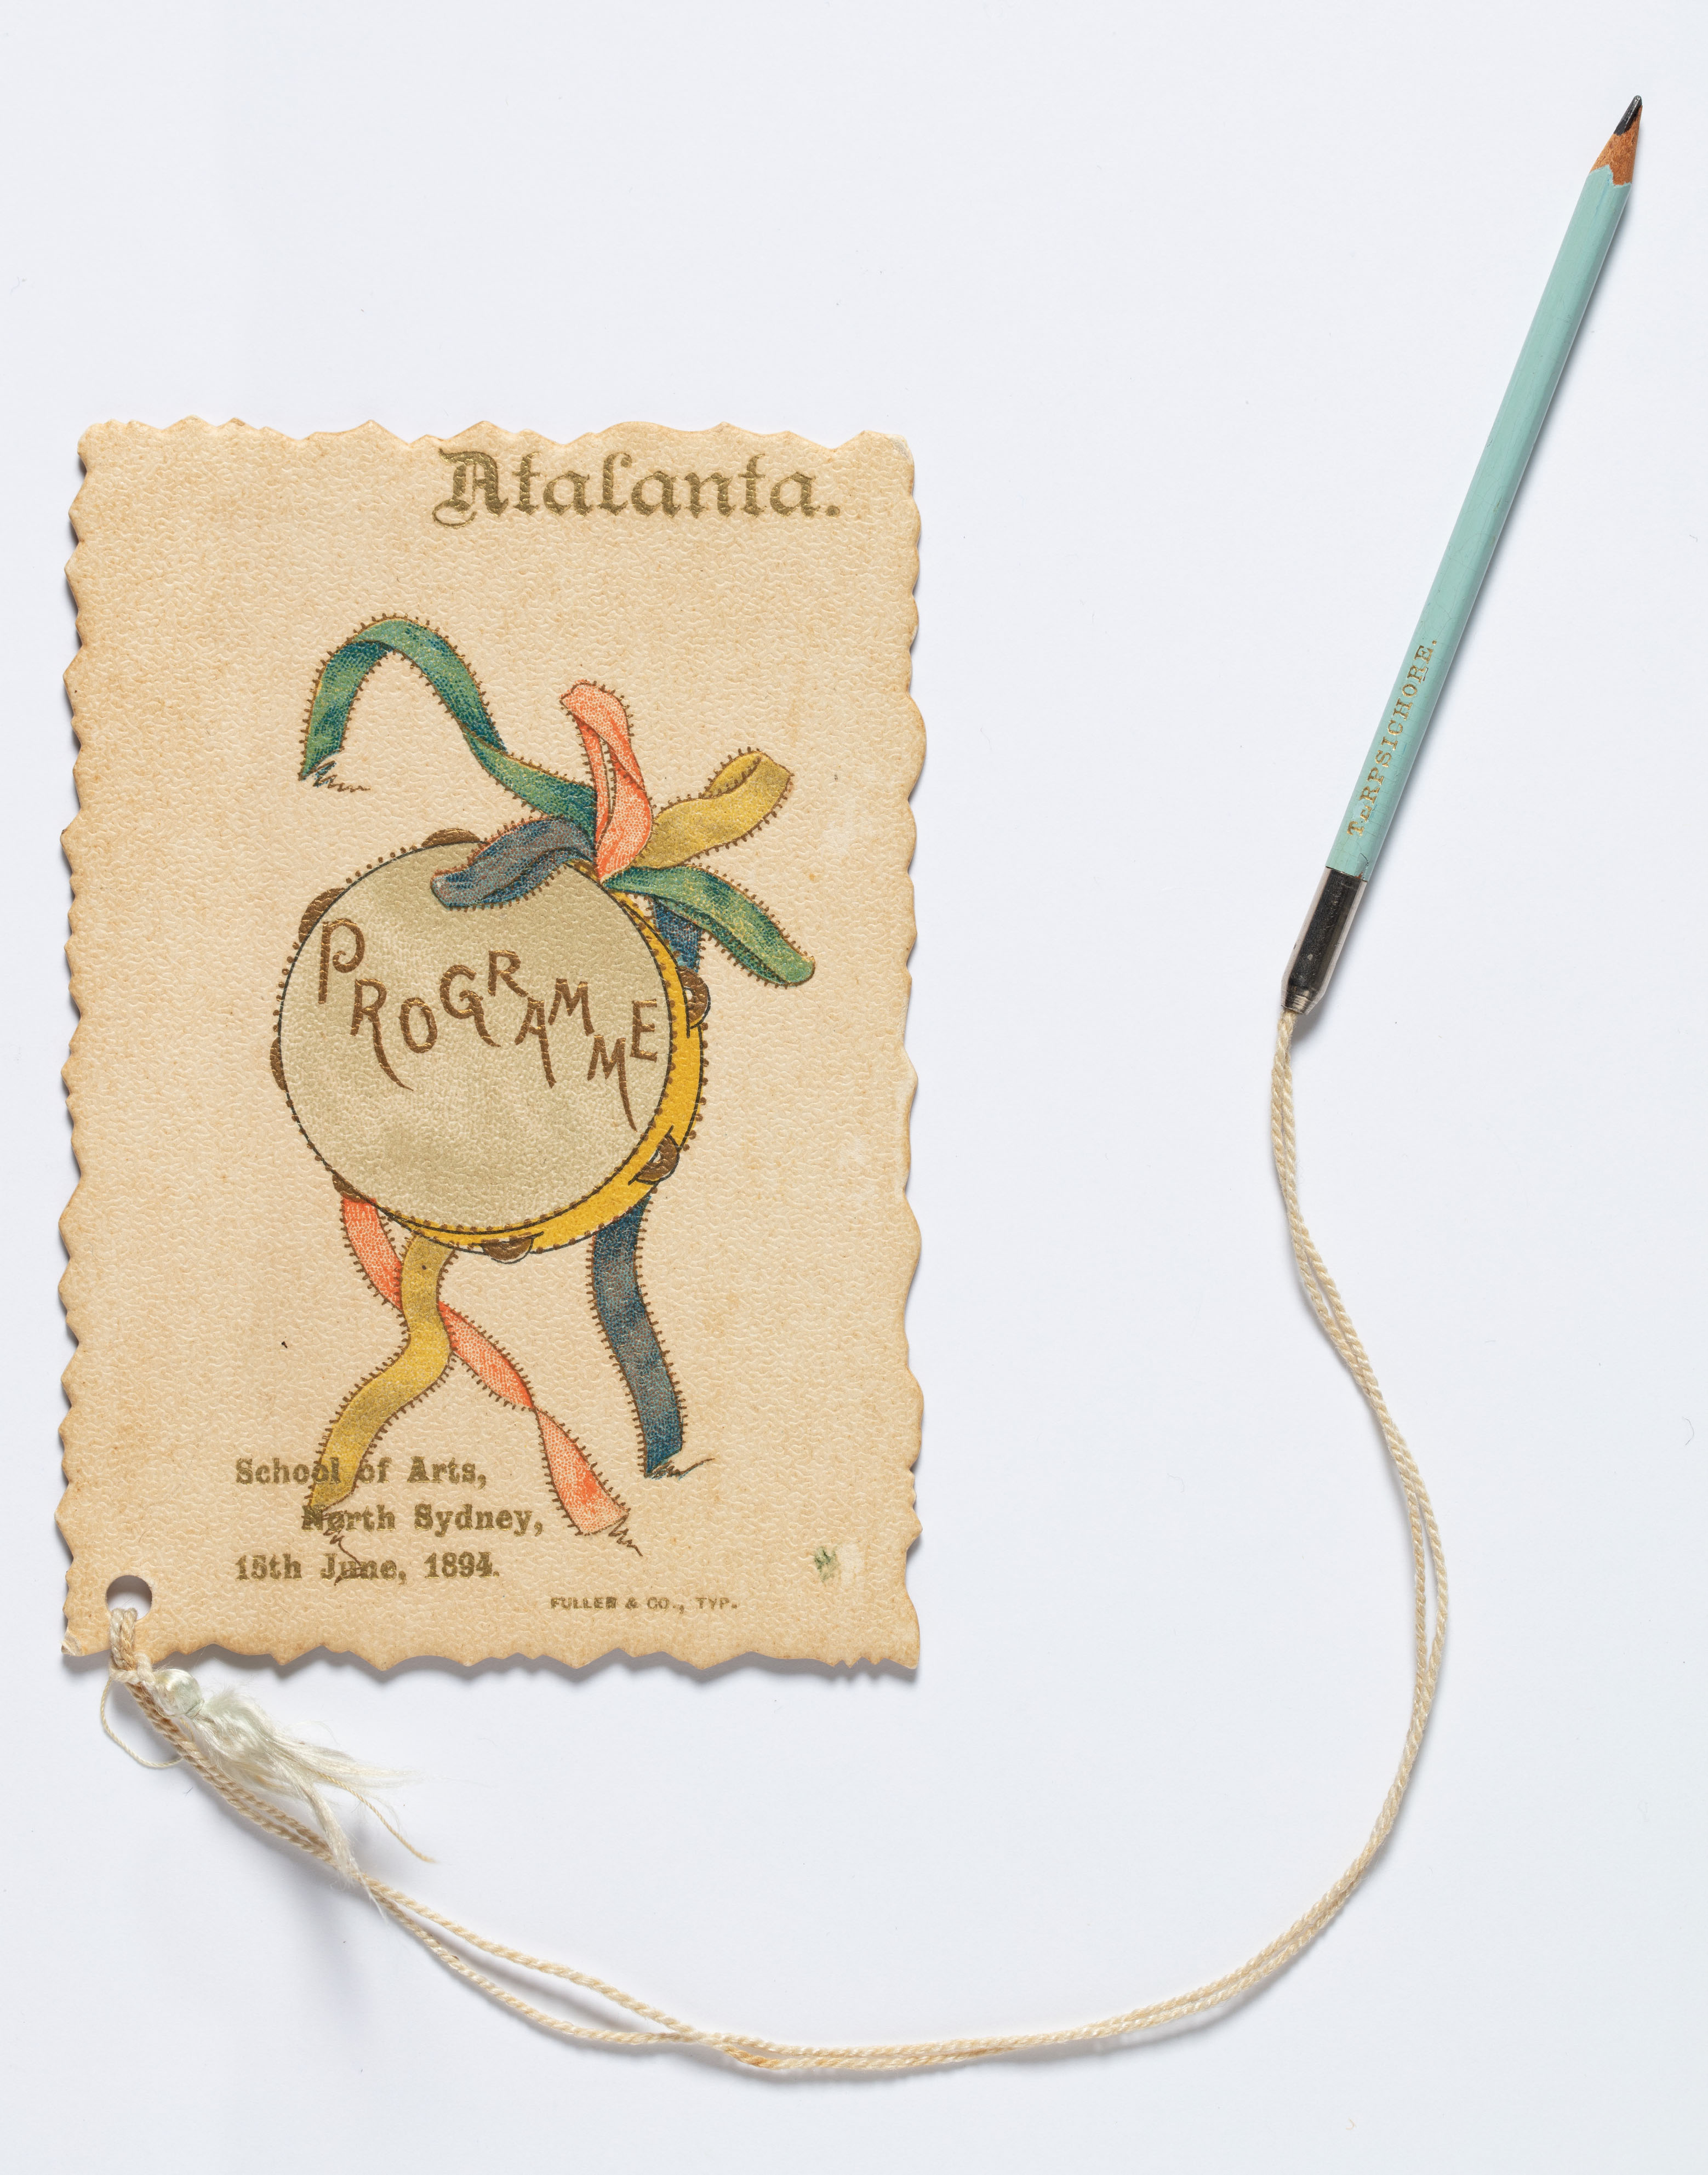 An illustrated card with a pencil attached via a string